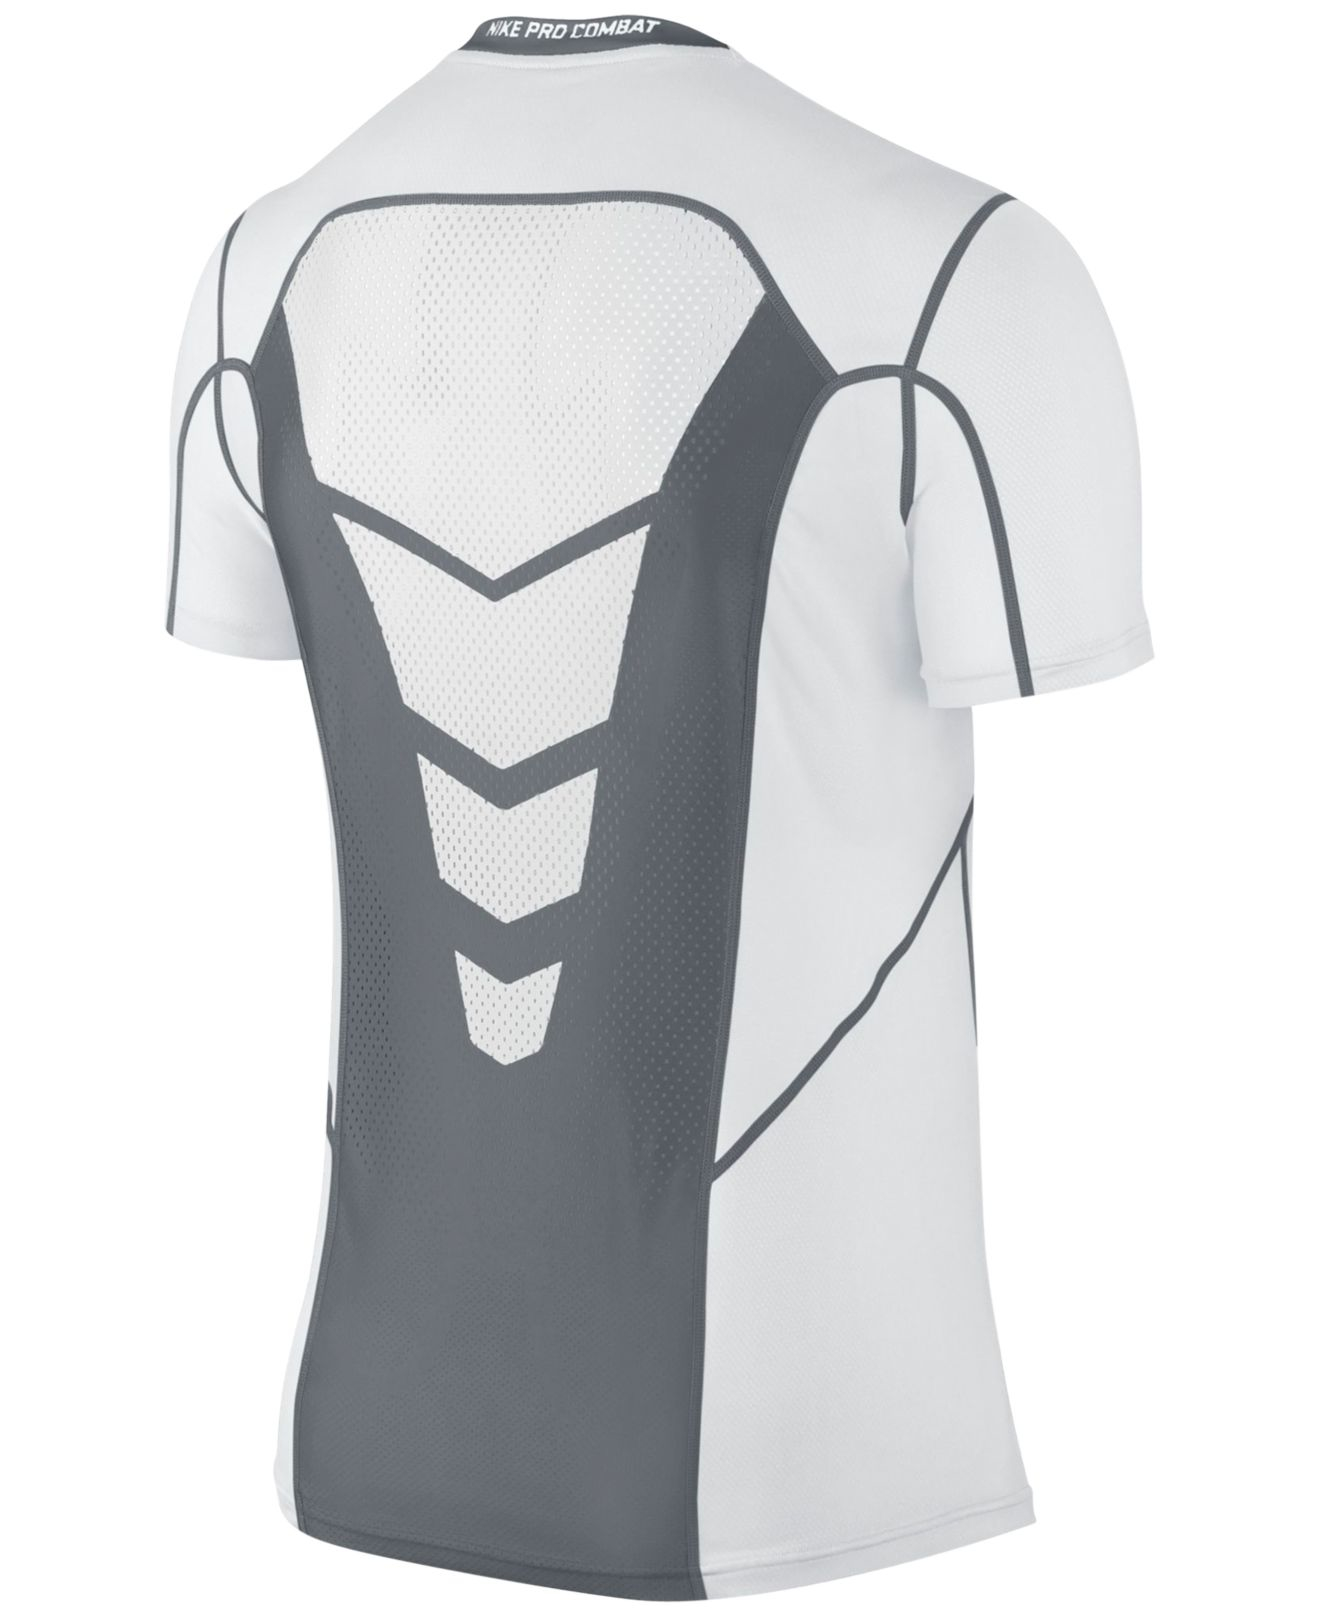 Lyst - Nike Fitted Hypercool Dri-fit T-shirt in White for Men